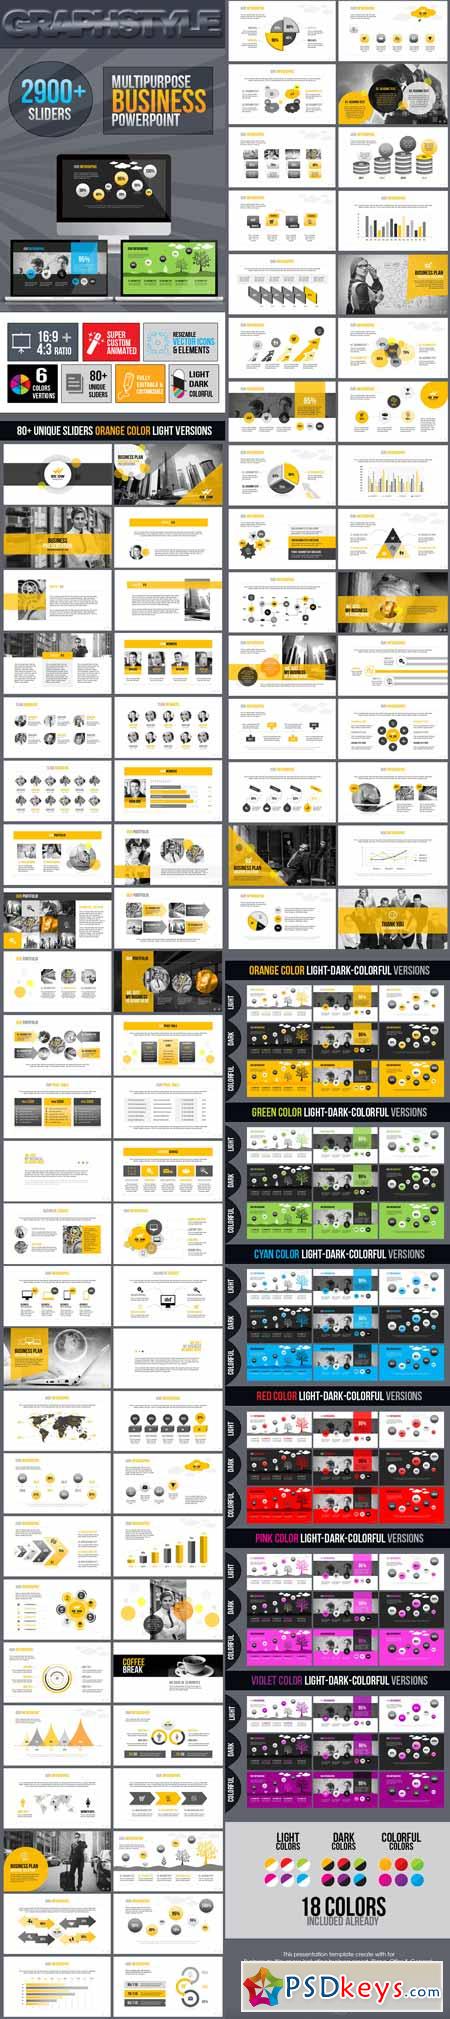 Exrow_Business PowerPoint 8145191